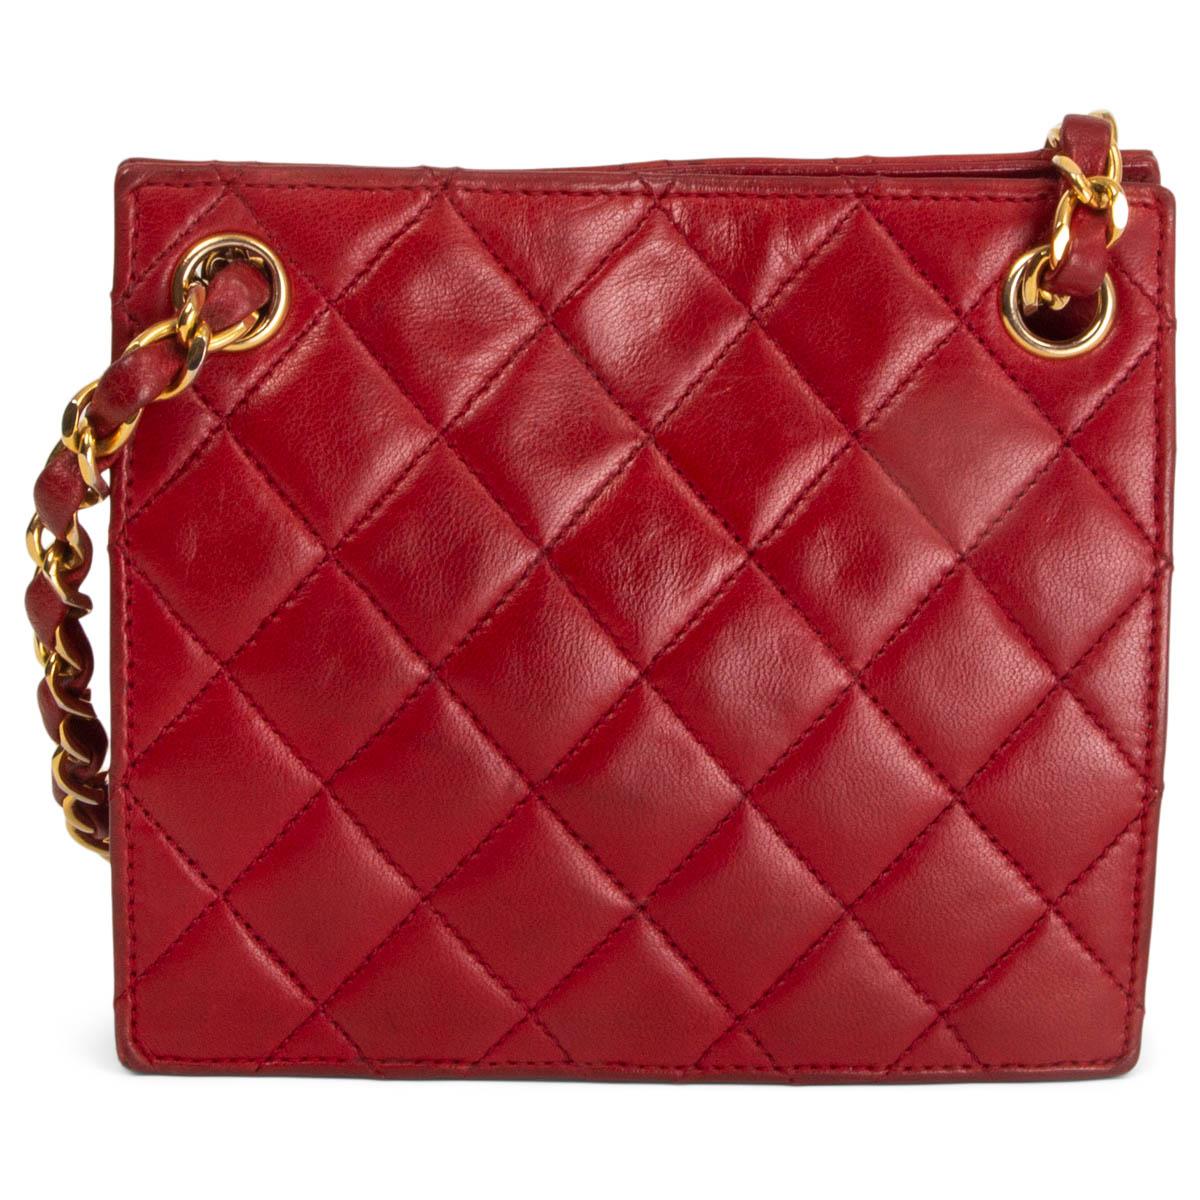 Red CHANEL red quilted leather 1980's SQUARE MINI Shoulder Bag